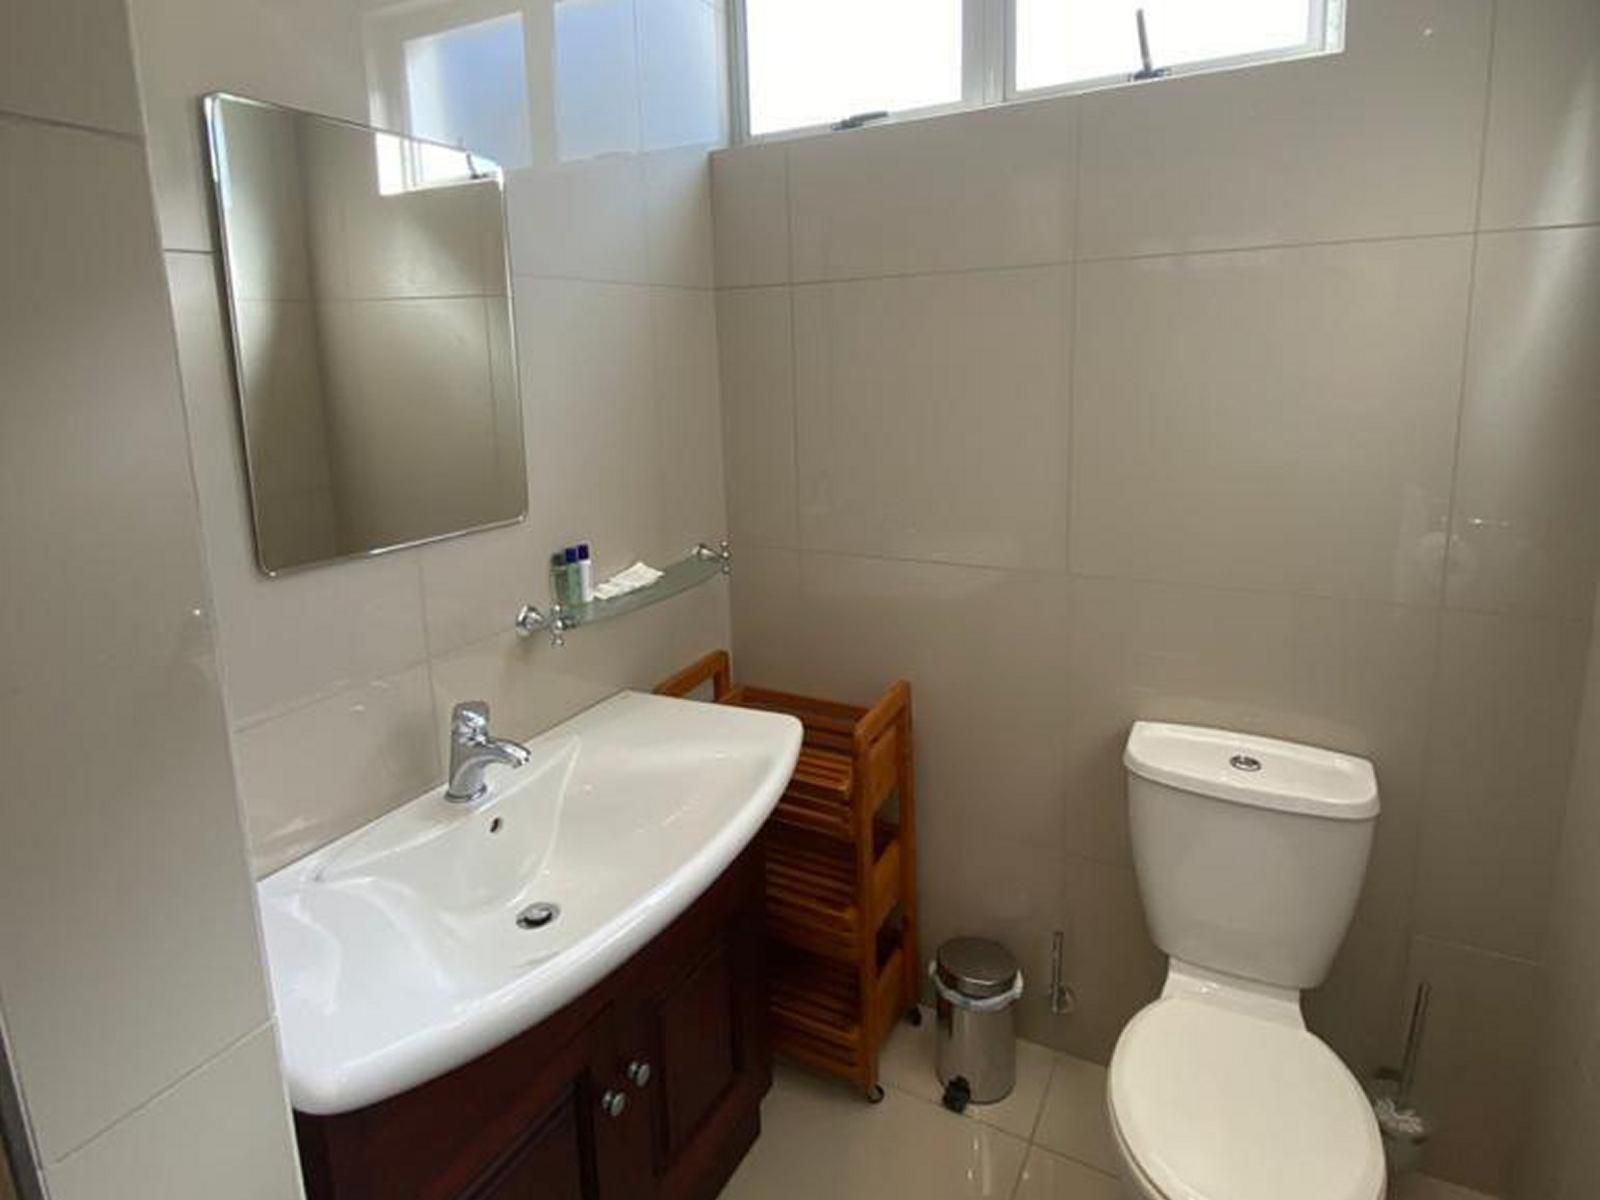 Singatha Guesthouse And Conference Centre Morningside Durban Kwazulu Natal South Africa Bathroom